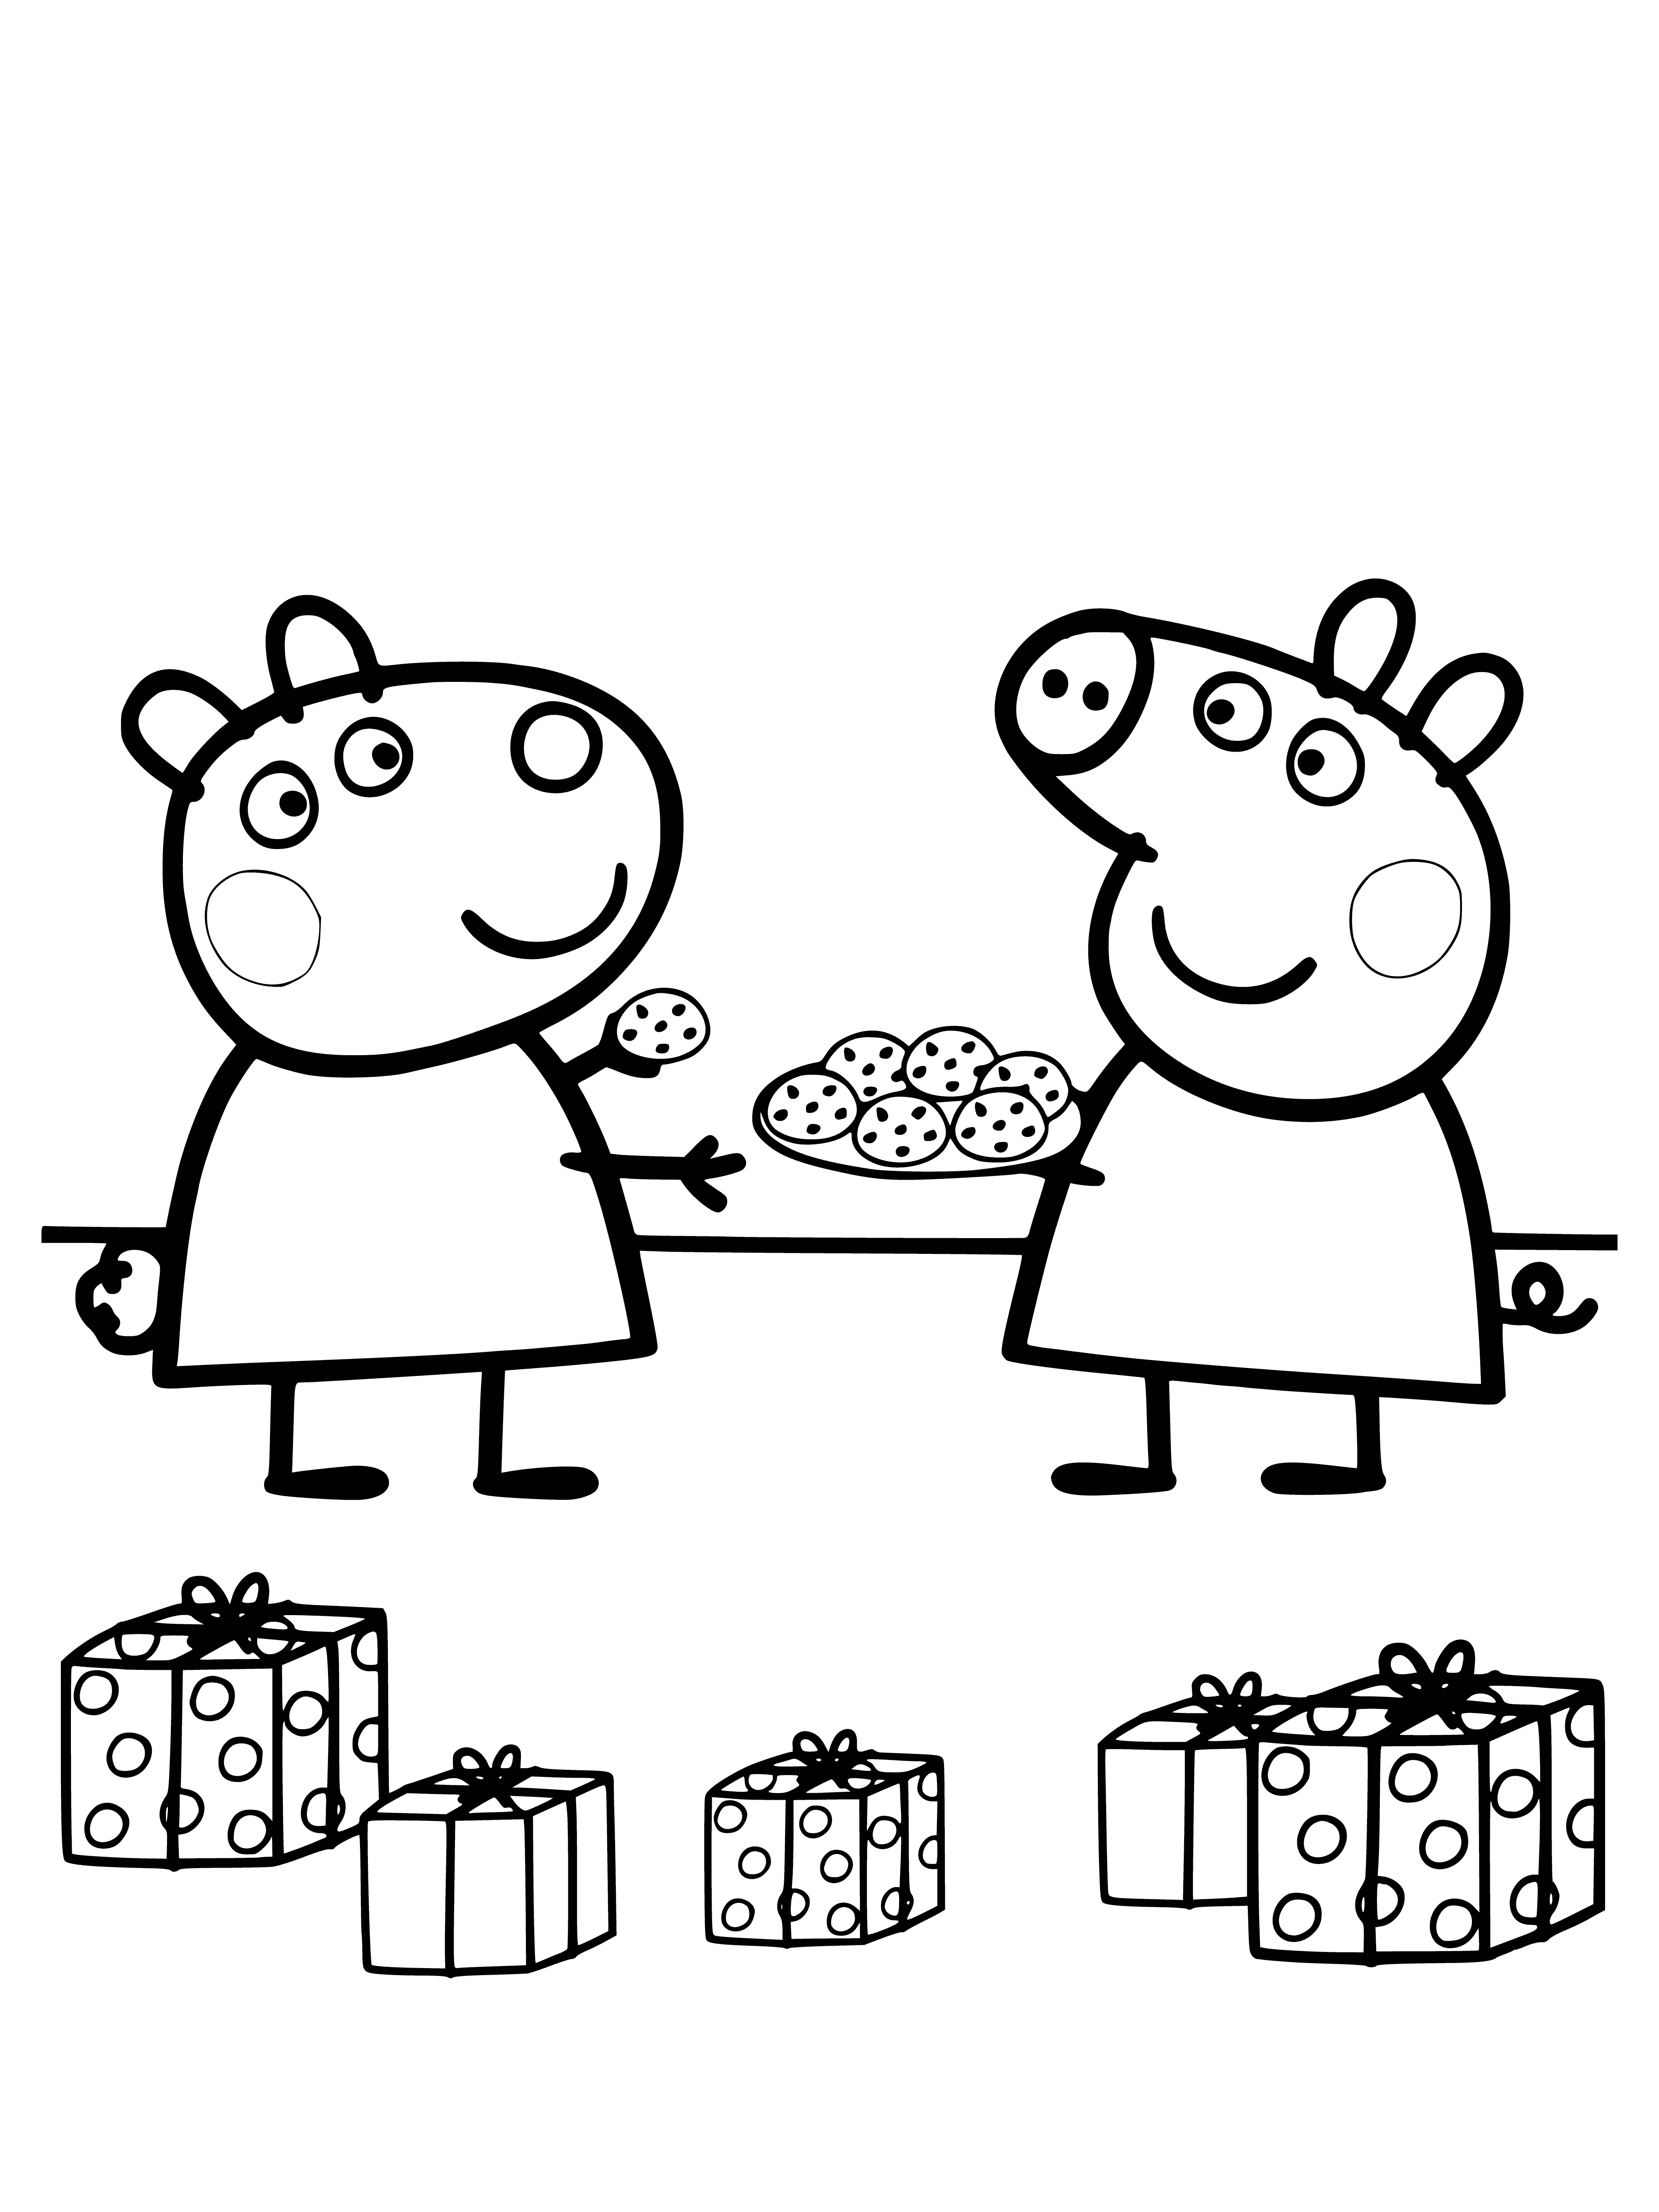 coloring page: Peppa & Susie have fun playing together on a hill: Peppa in a blue dress & Susie in a pink dress, both smiling. #FriendshipGoals